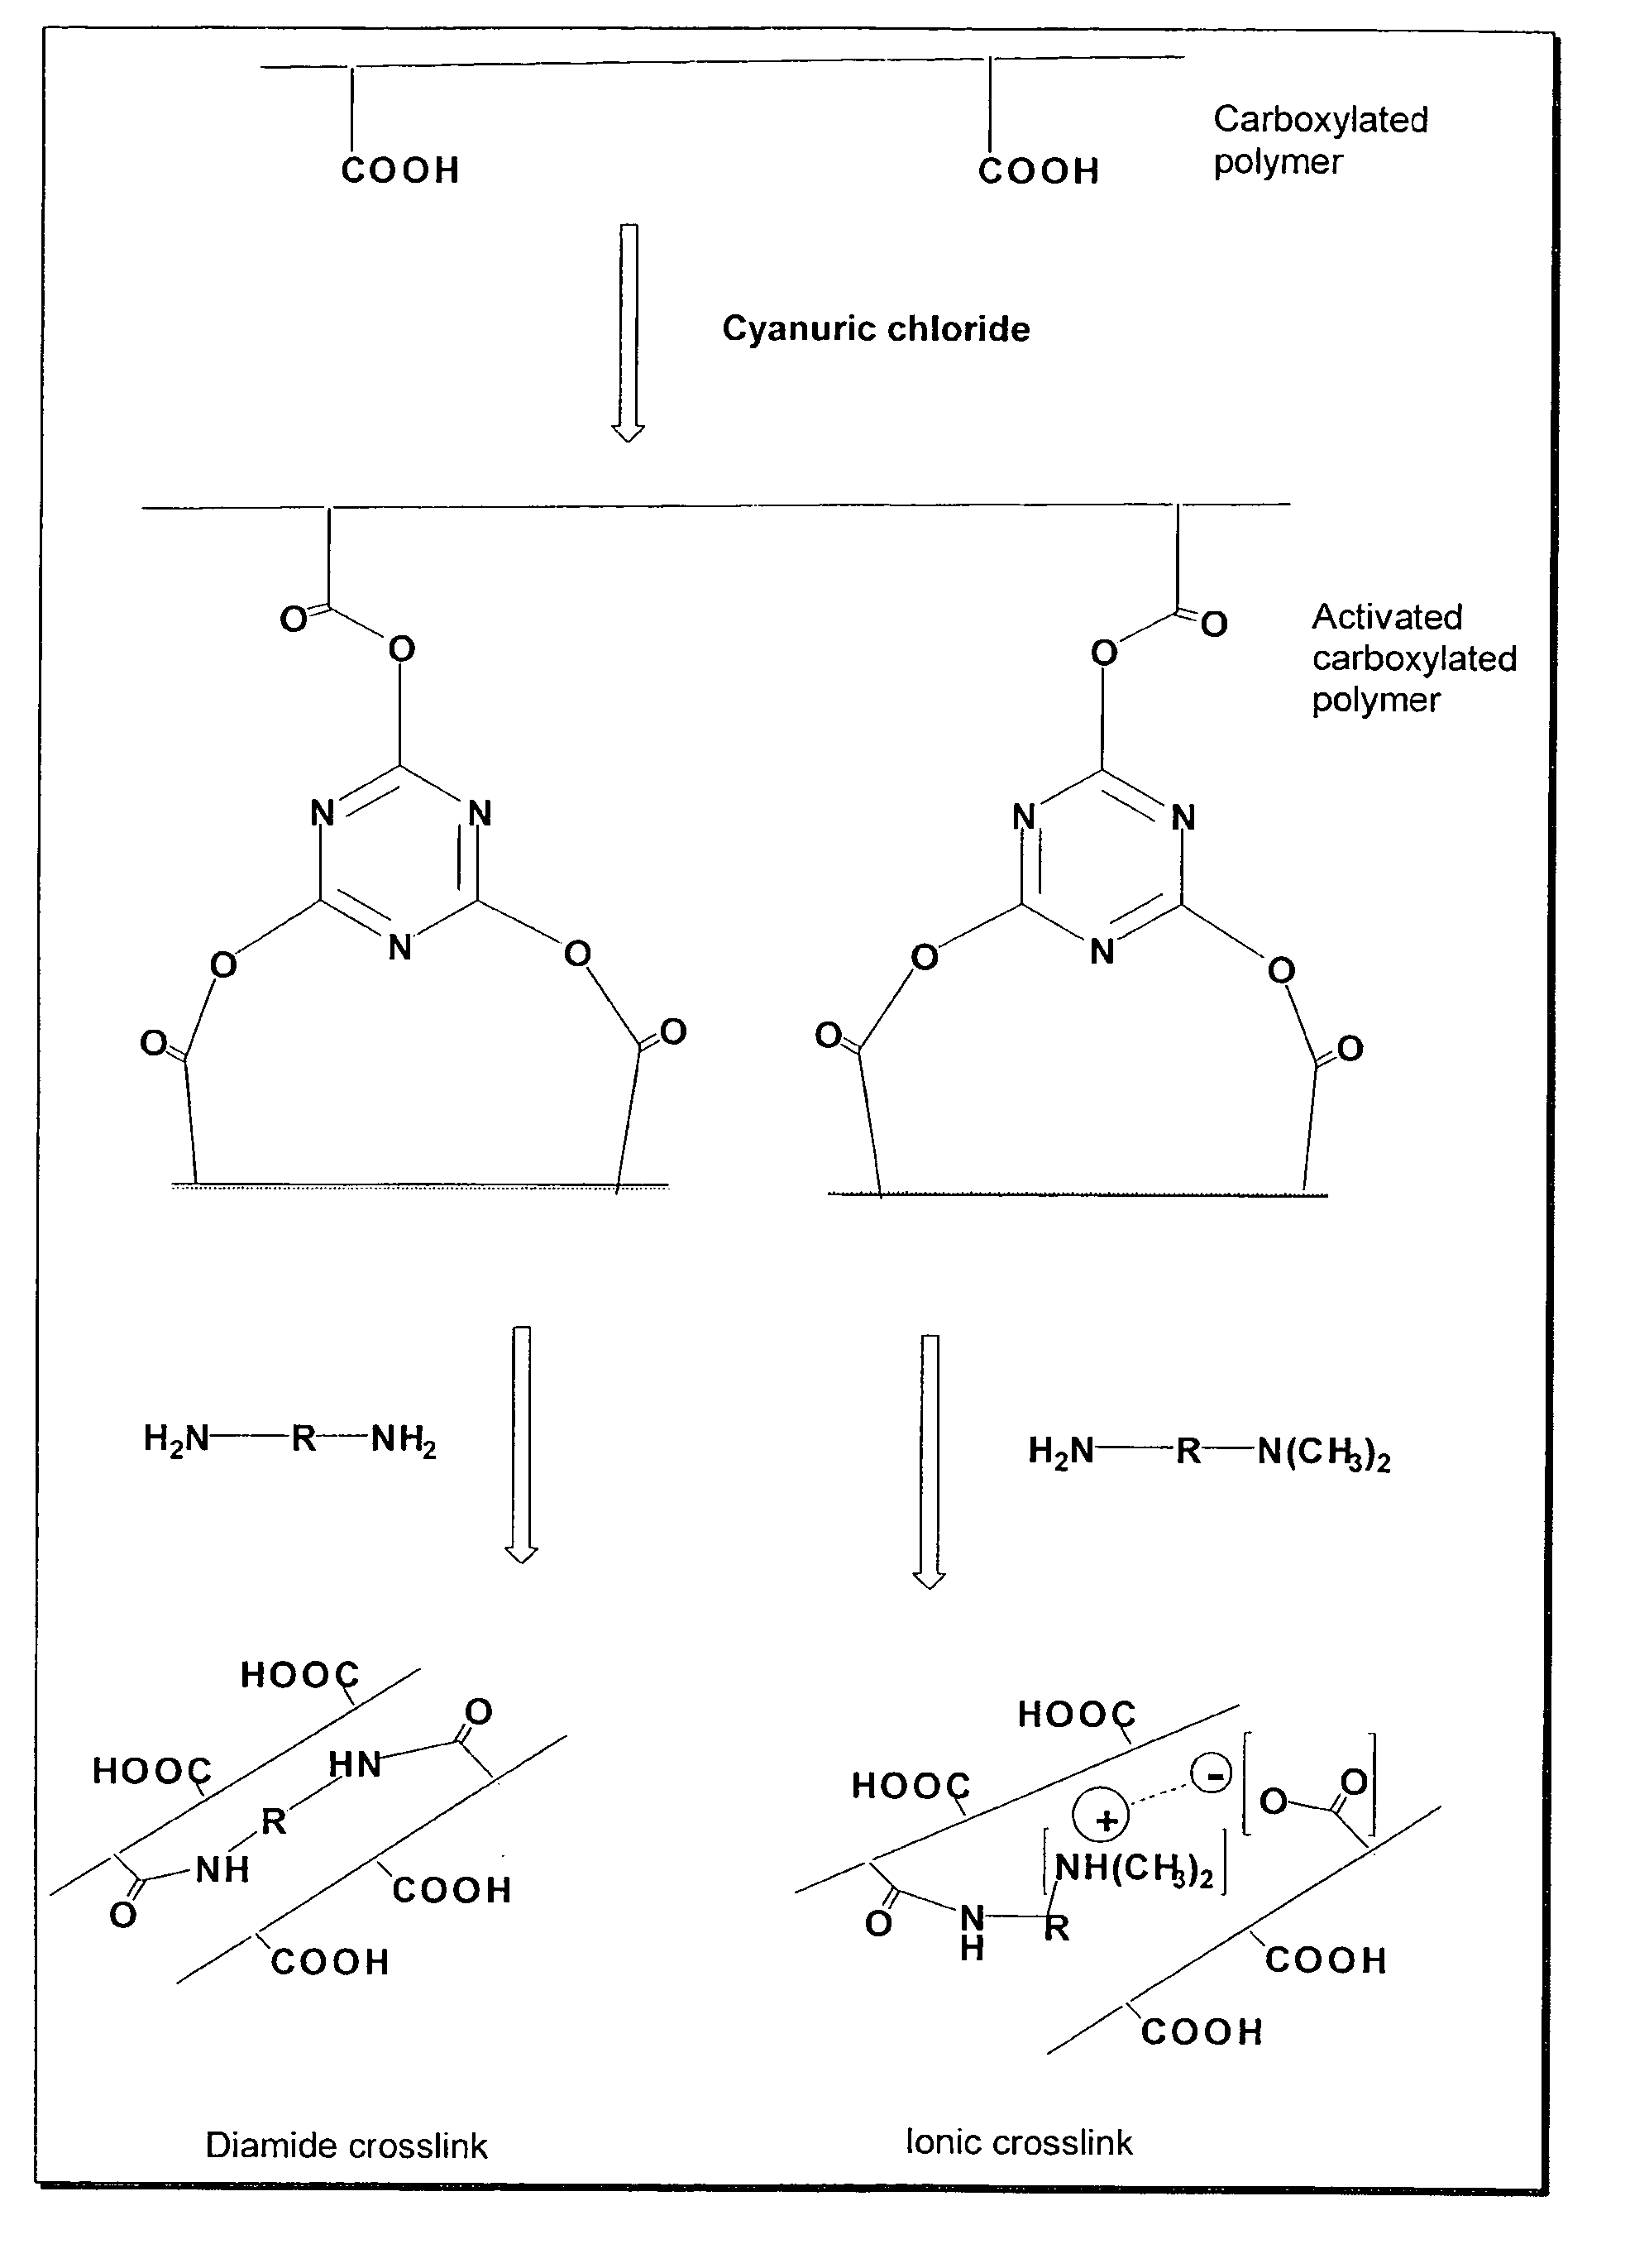 Method of crosslinking a mixture of carboxylated polymers using a triazine crosslinking activator